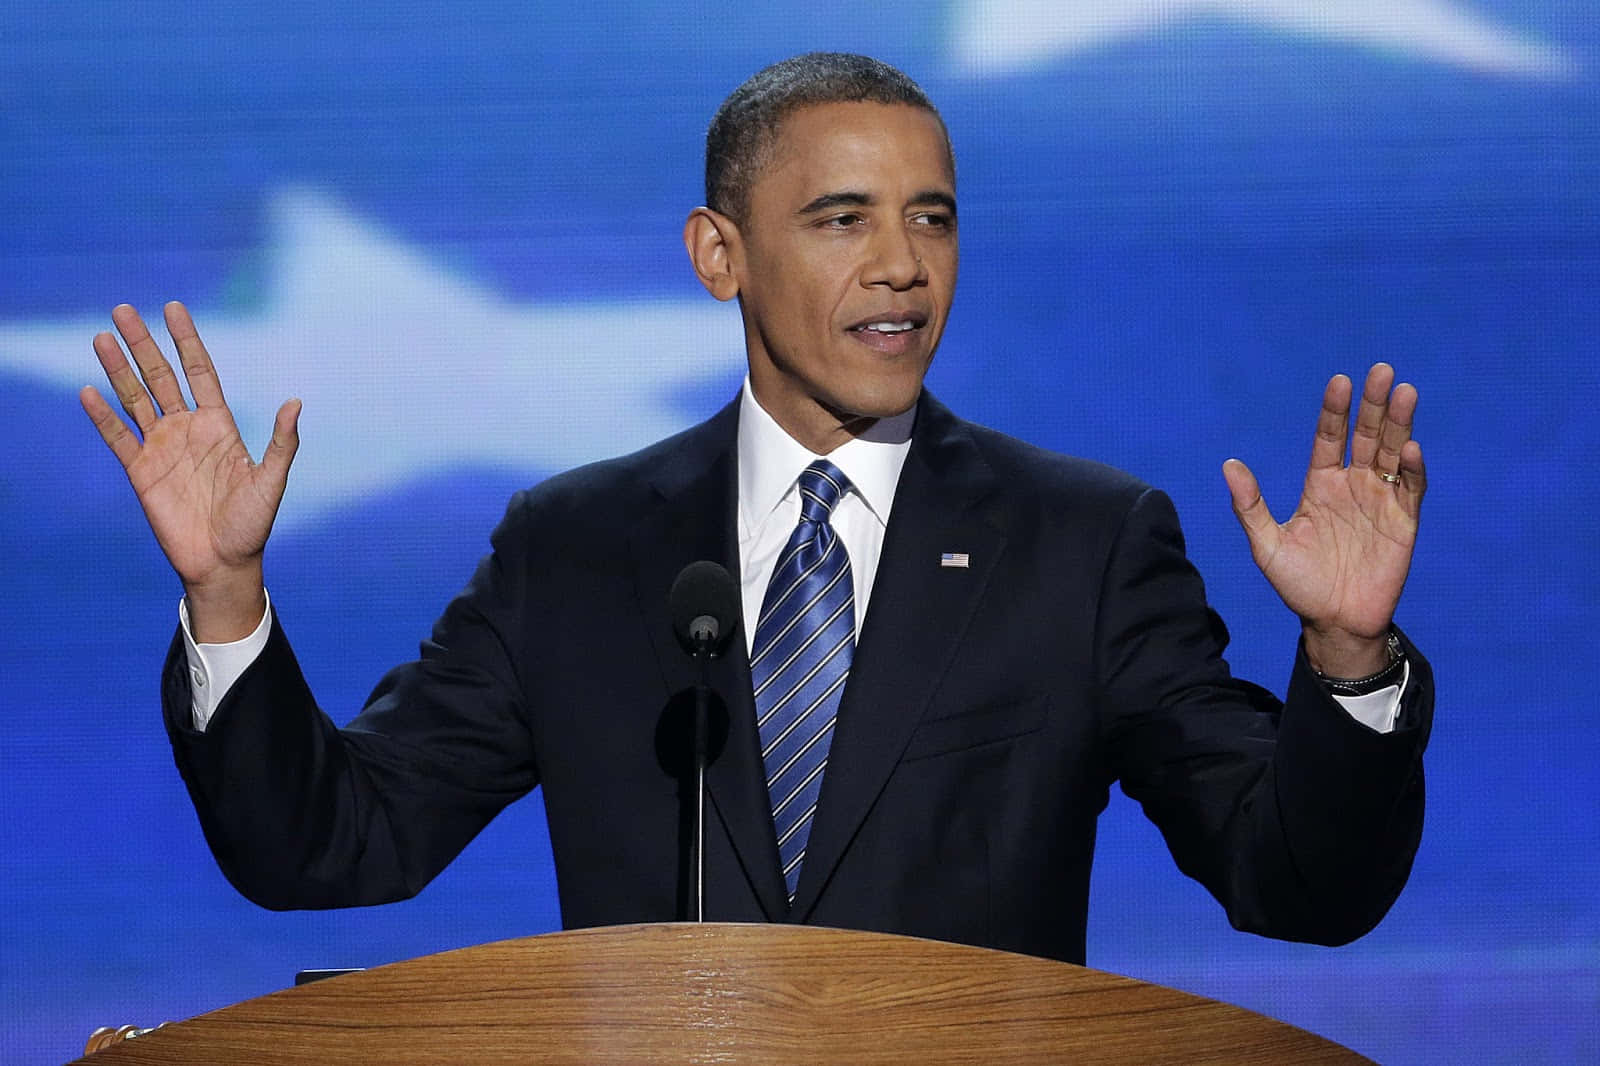 Obama Speaks At The Republican Convention